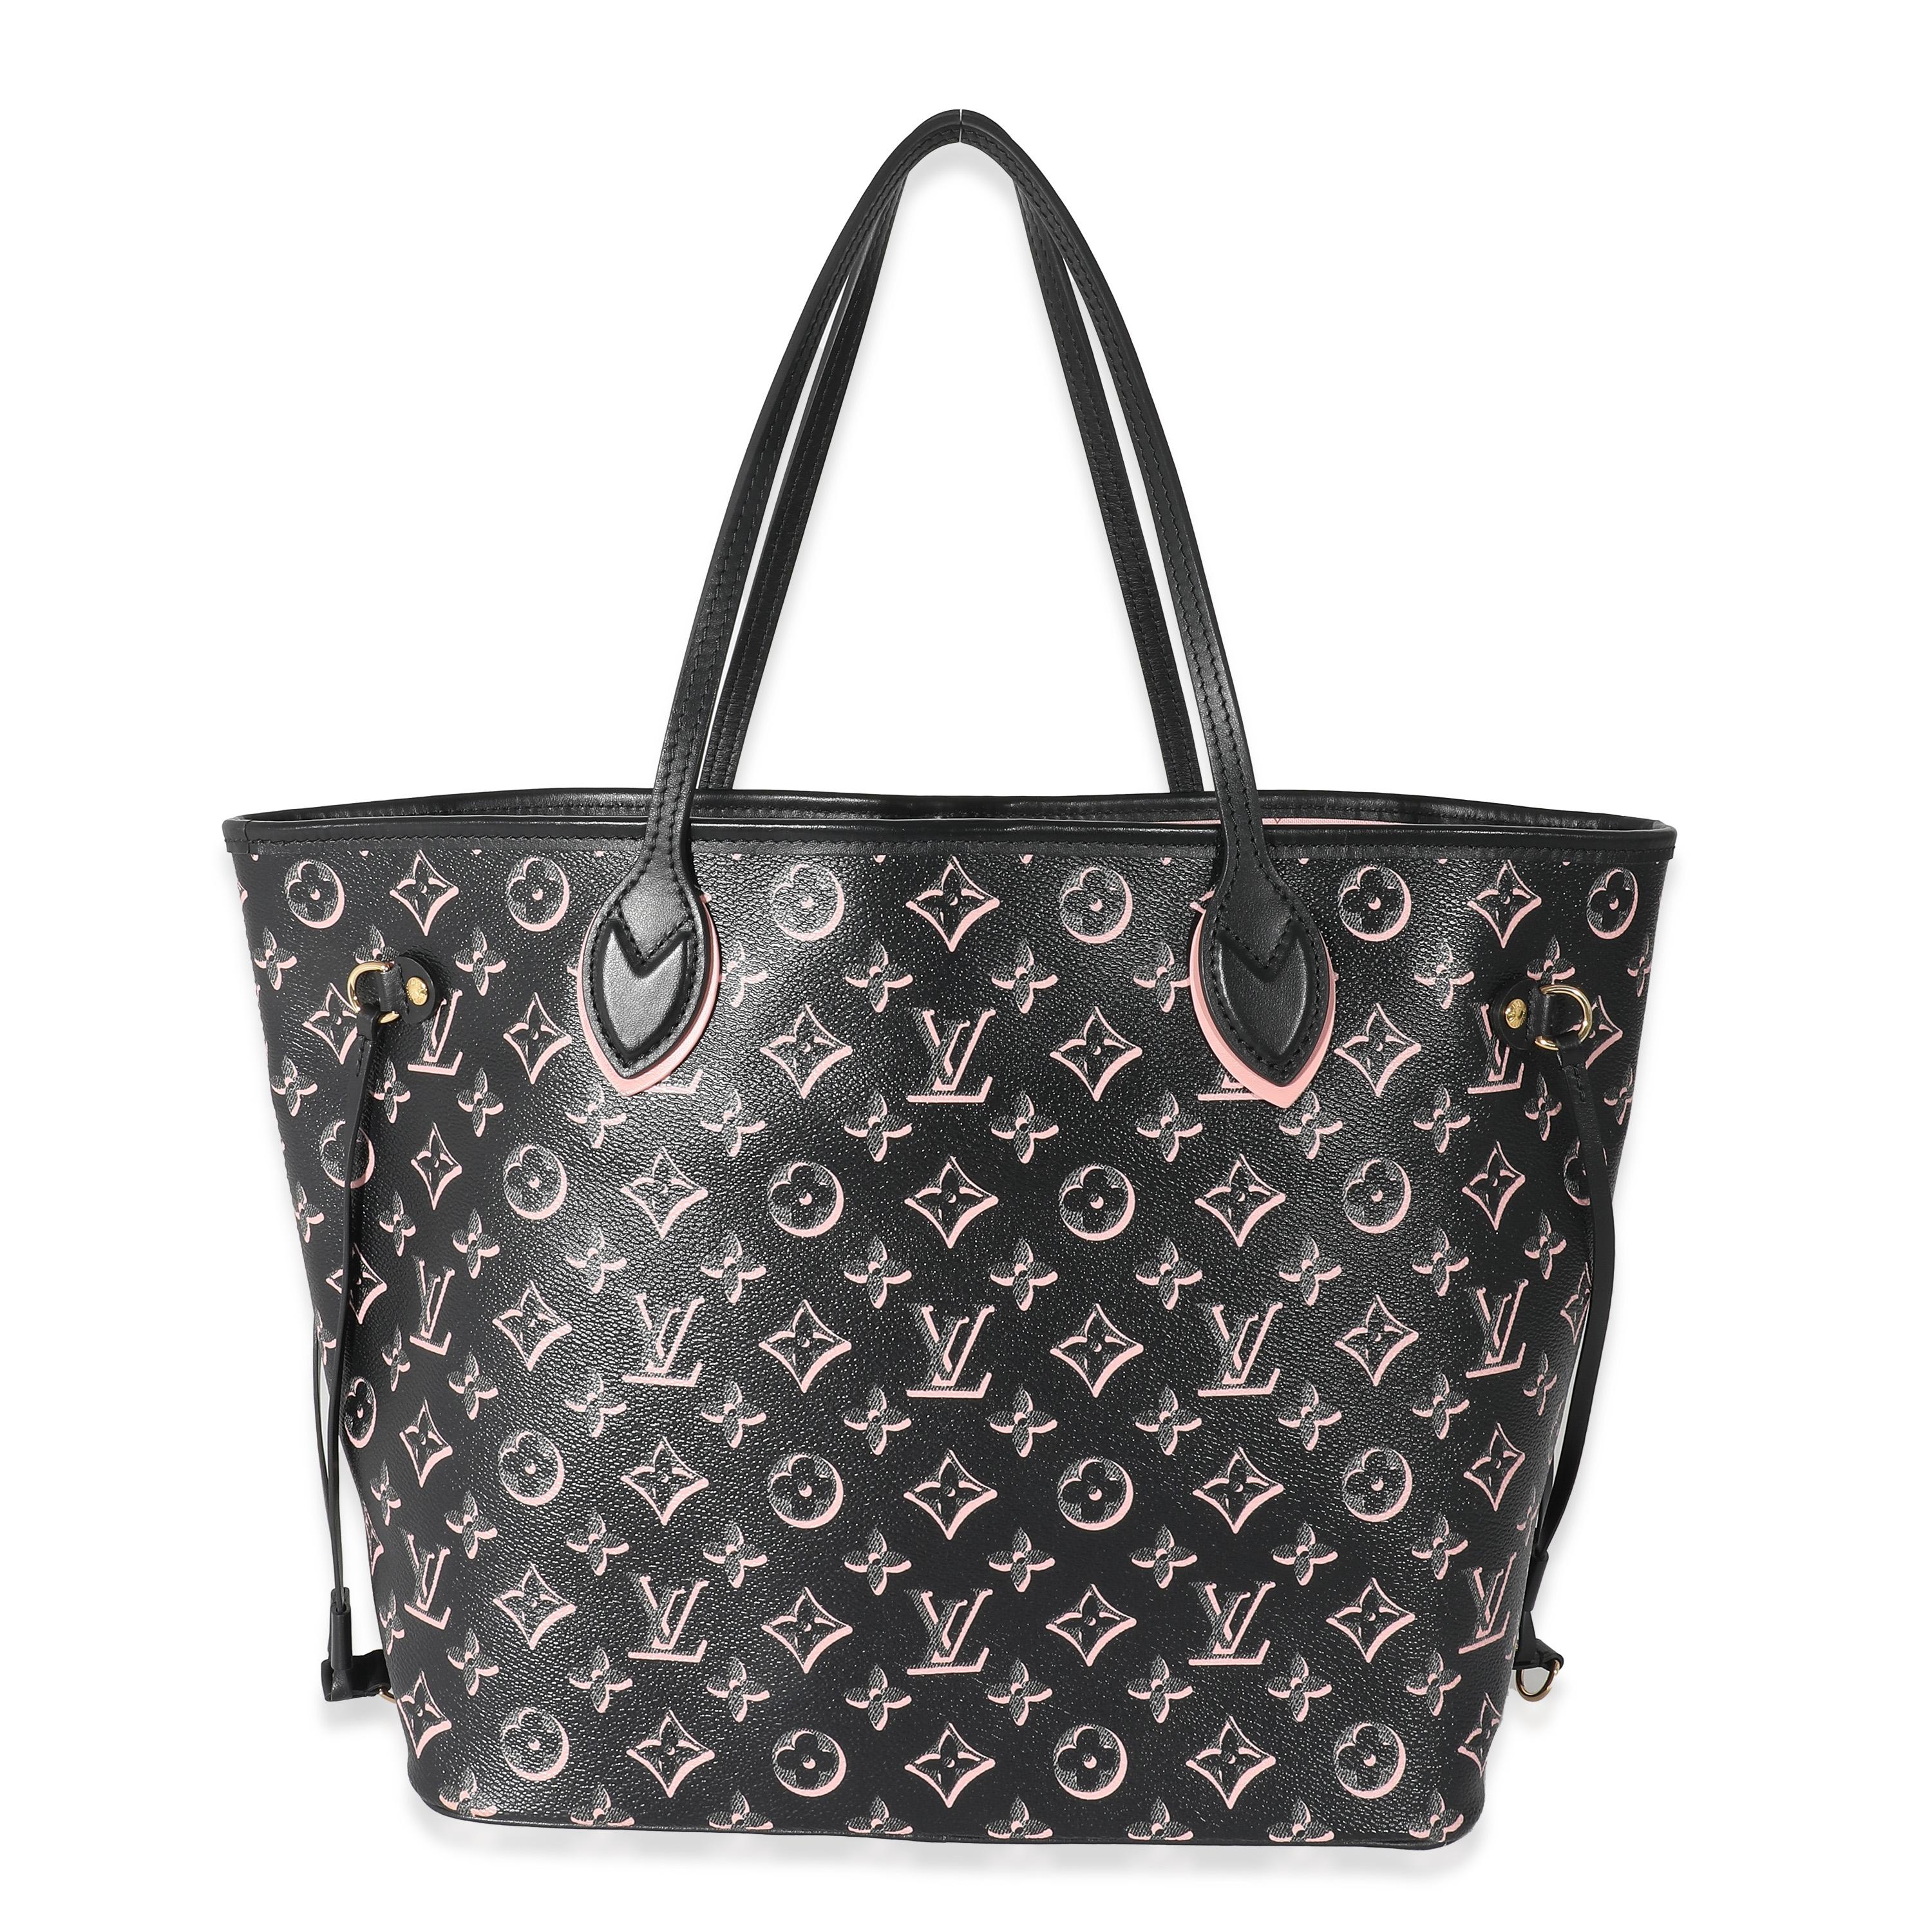 Listing Title: Louis Vuitton Black Pink Monogram Canvas Fall For You Neverfull MM
SKU: 134208
Condition: Pre-owned 
Handbag Condition: Pristine
Brand: Louis Vuitton
Model: Fall For You Neverfull MM
Origin Country: France
Handbag Silhouette: Shoulder